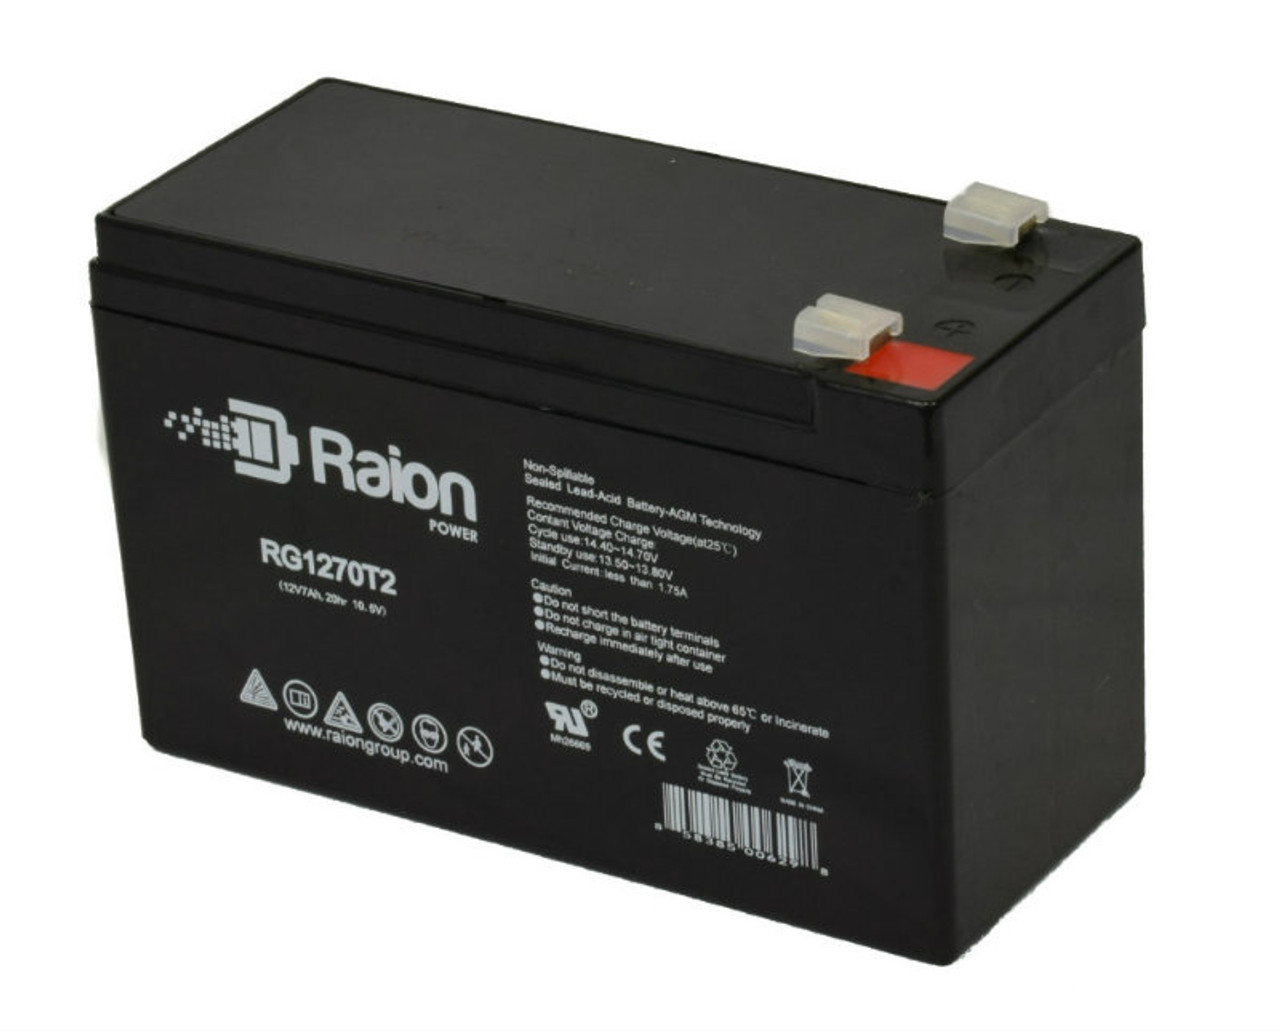 Raion Power RG1270T1 12V 7Ah Non-Spillable Replacement Battery for Johnson Controls JC1260